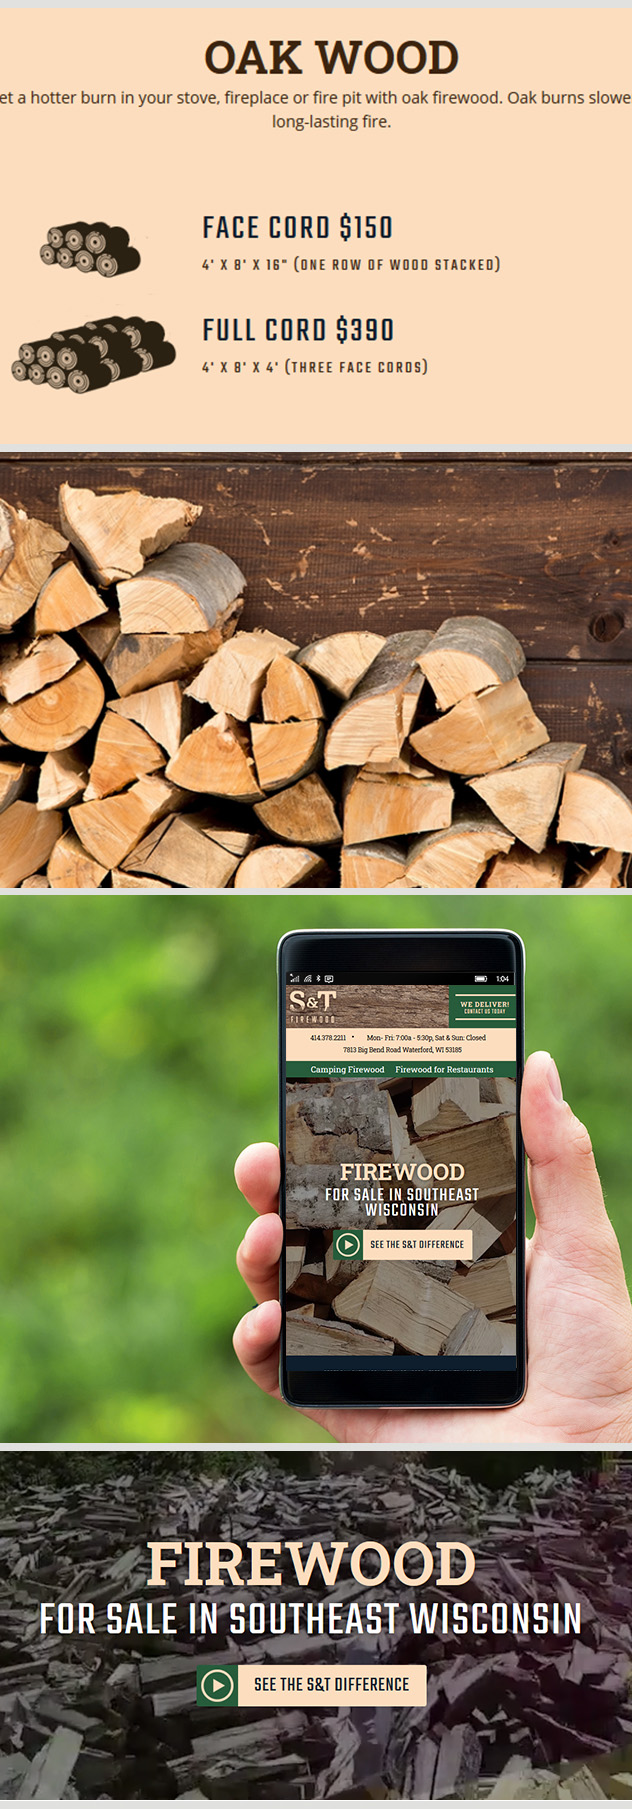 Milwaukee web design and development for S&T Firewood